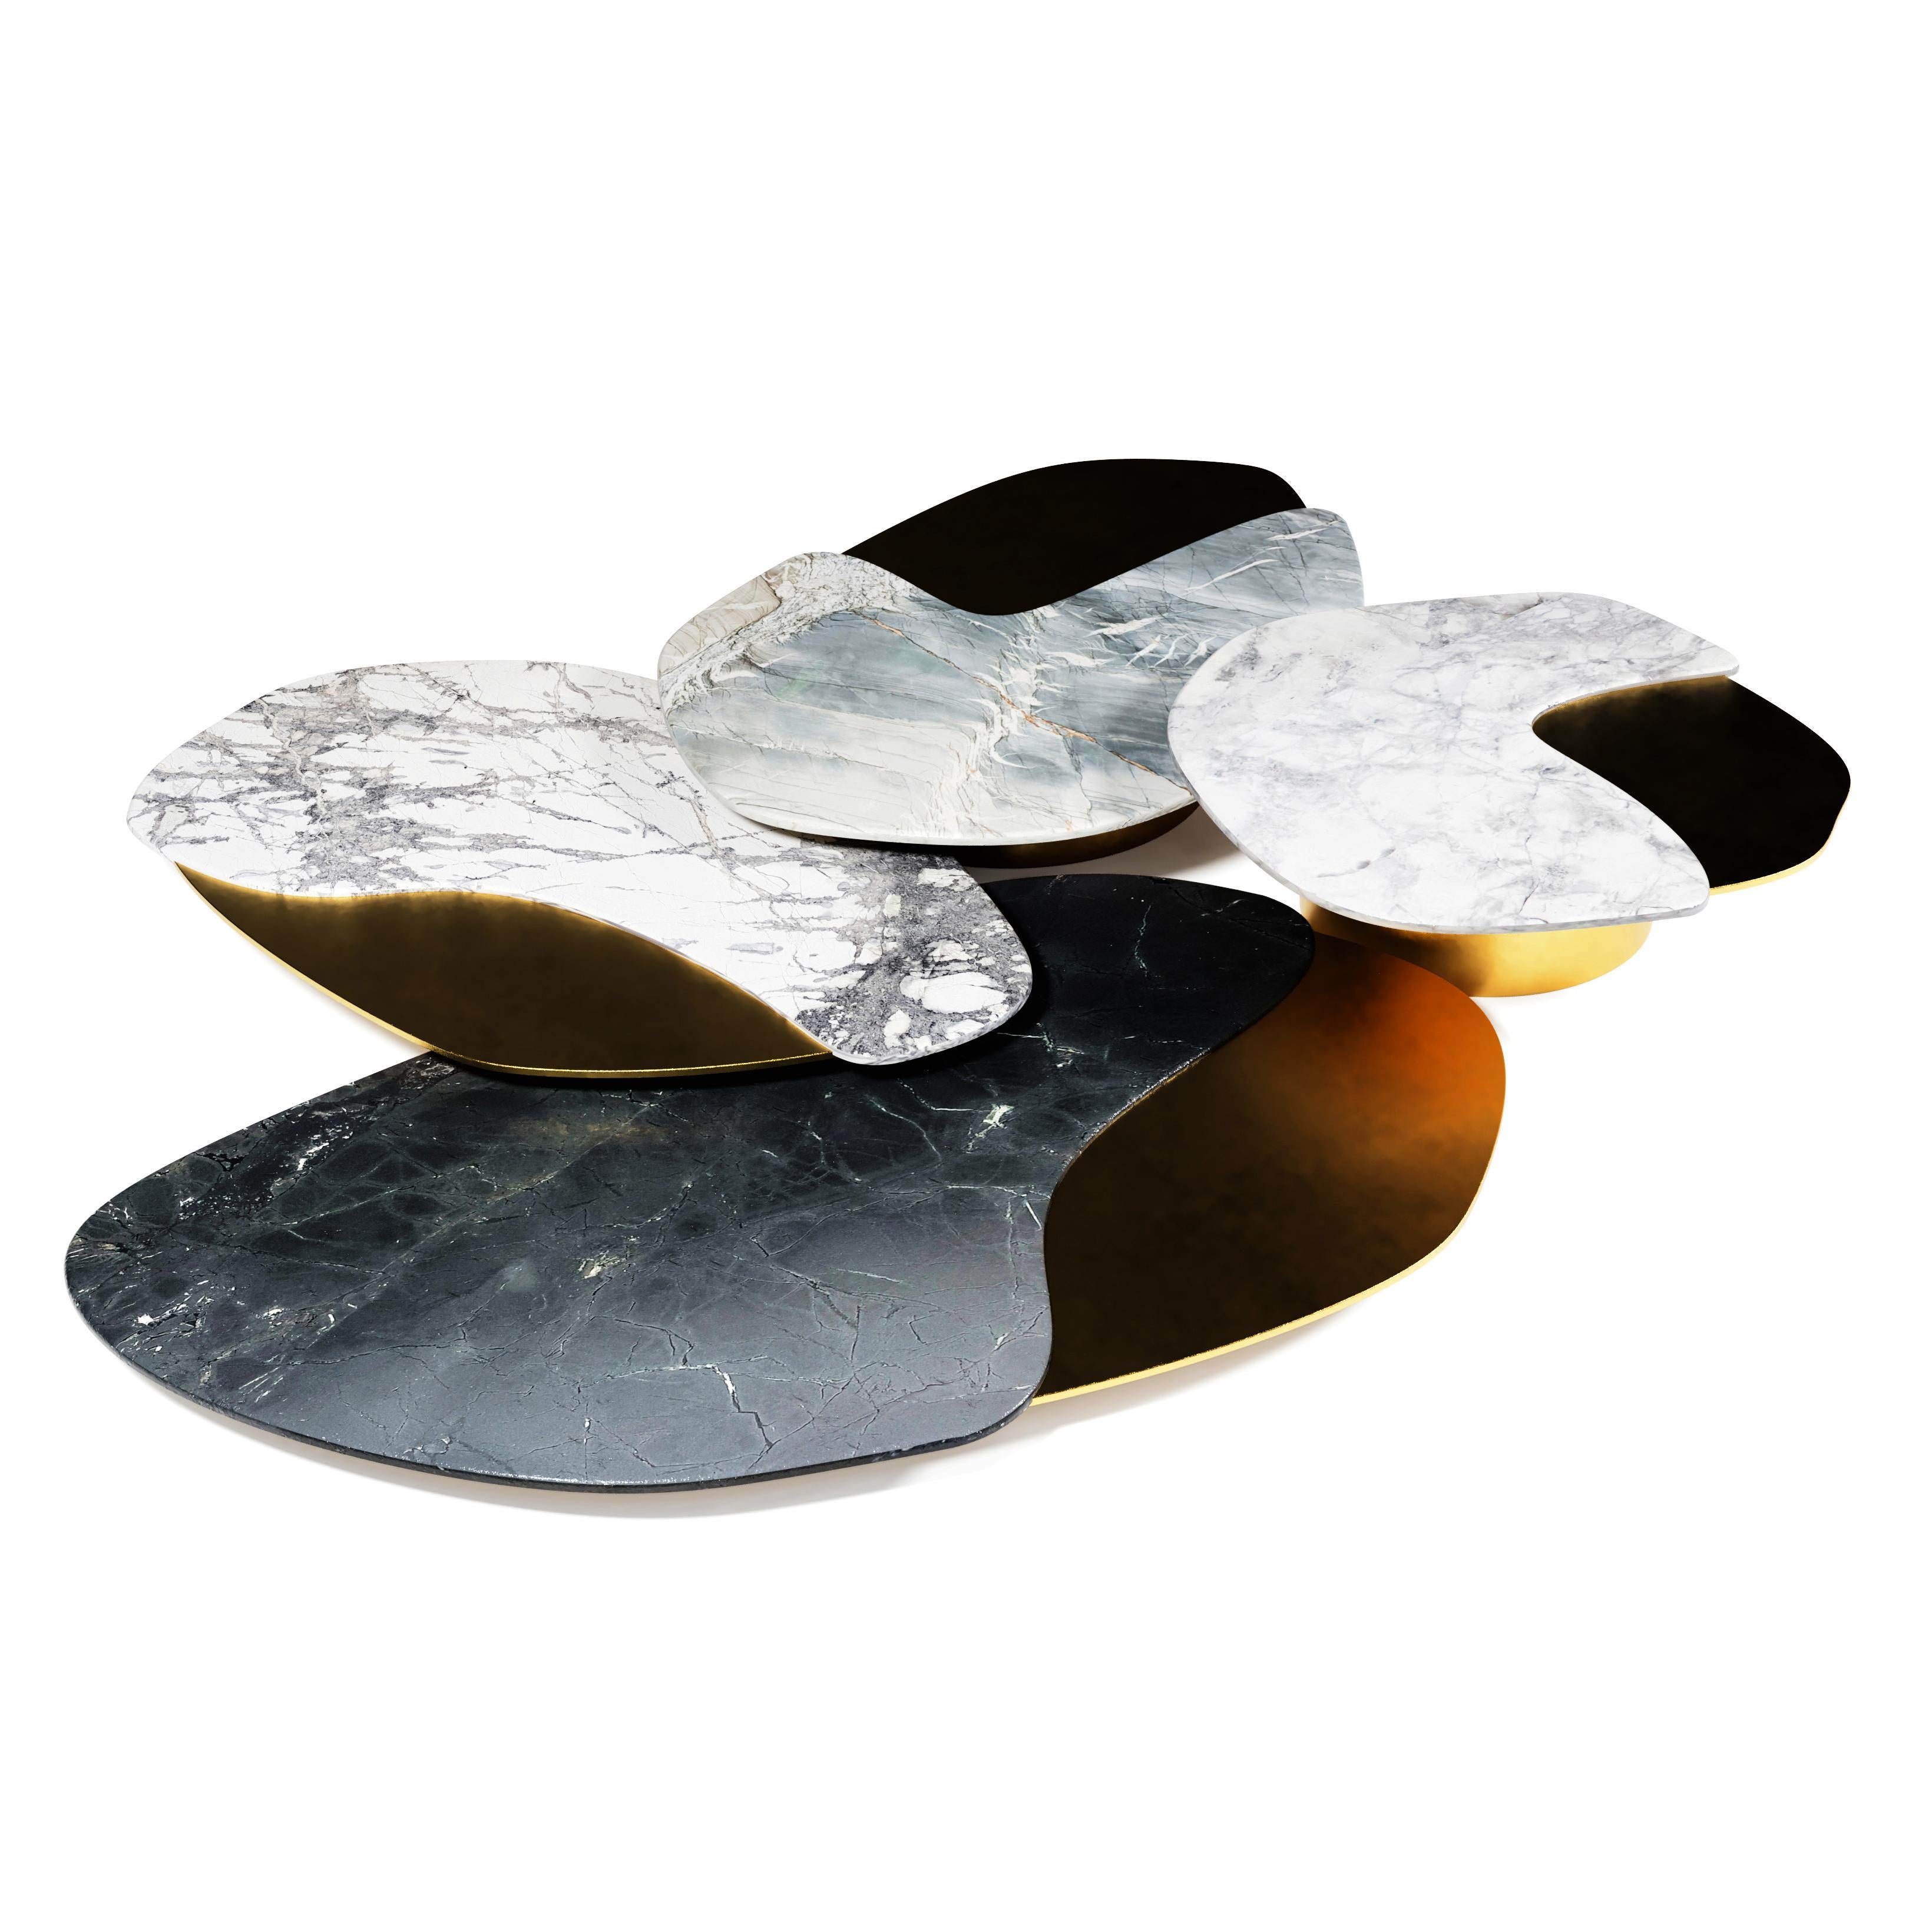 The Epicure coffee table, 1 of 1 by Grzegorz Majka
Edition 1 of 1
Dimensions: 98.54 x 86.61 x 17.72 in
Materials: Marble, quartz and brass

“The Epicure I” - contemporary center coffee table set of 4 items featuring natural quartzities and